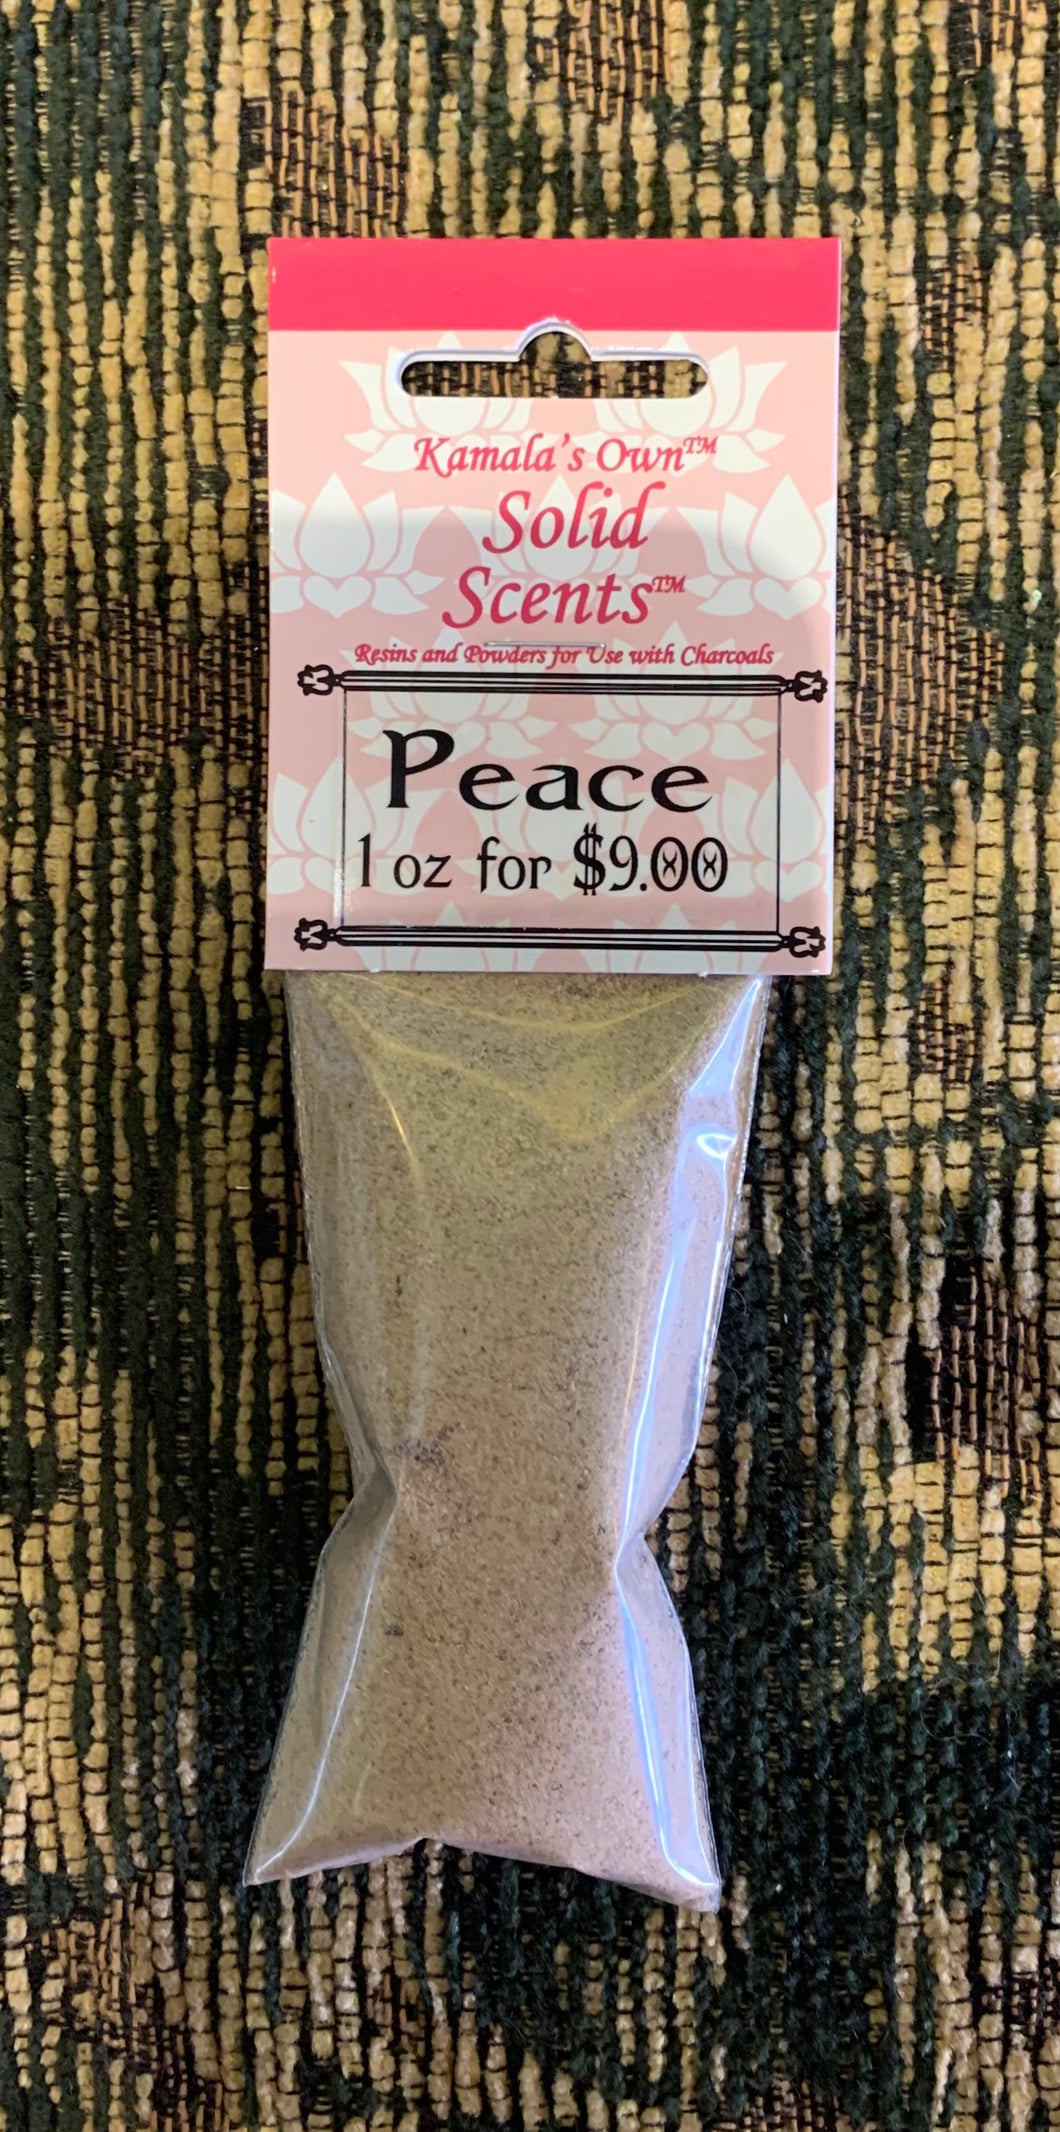 Peace powdered incense